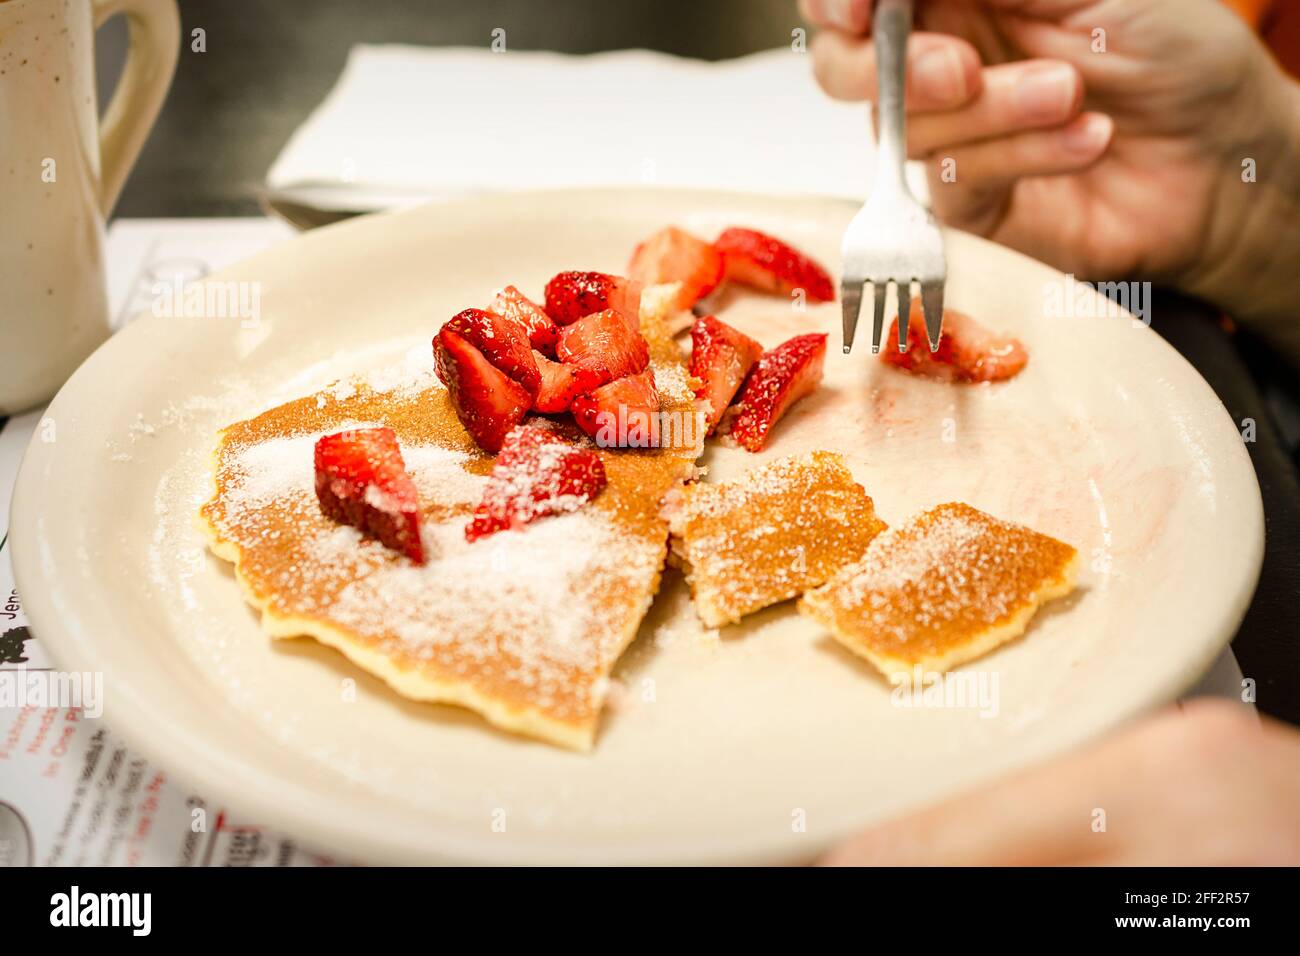 A patron at a diner finishes her pancakes with fresh strawberries and granulated sugar. Stock Photo